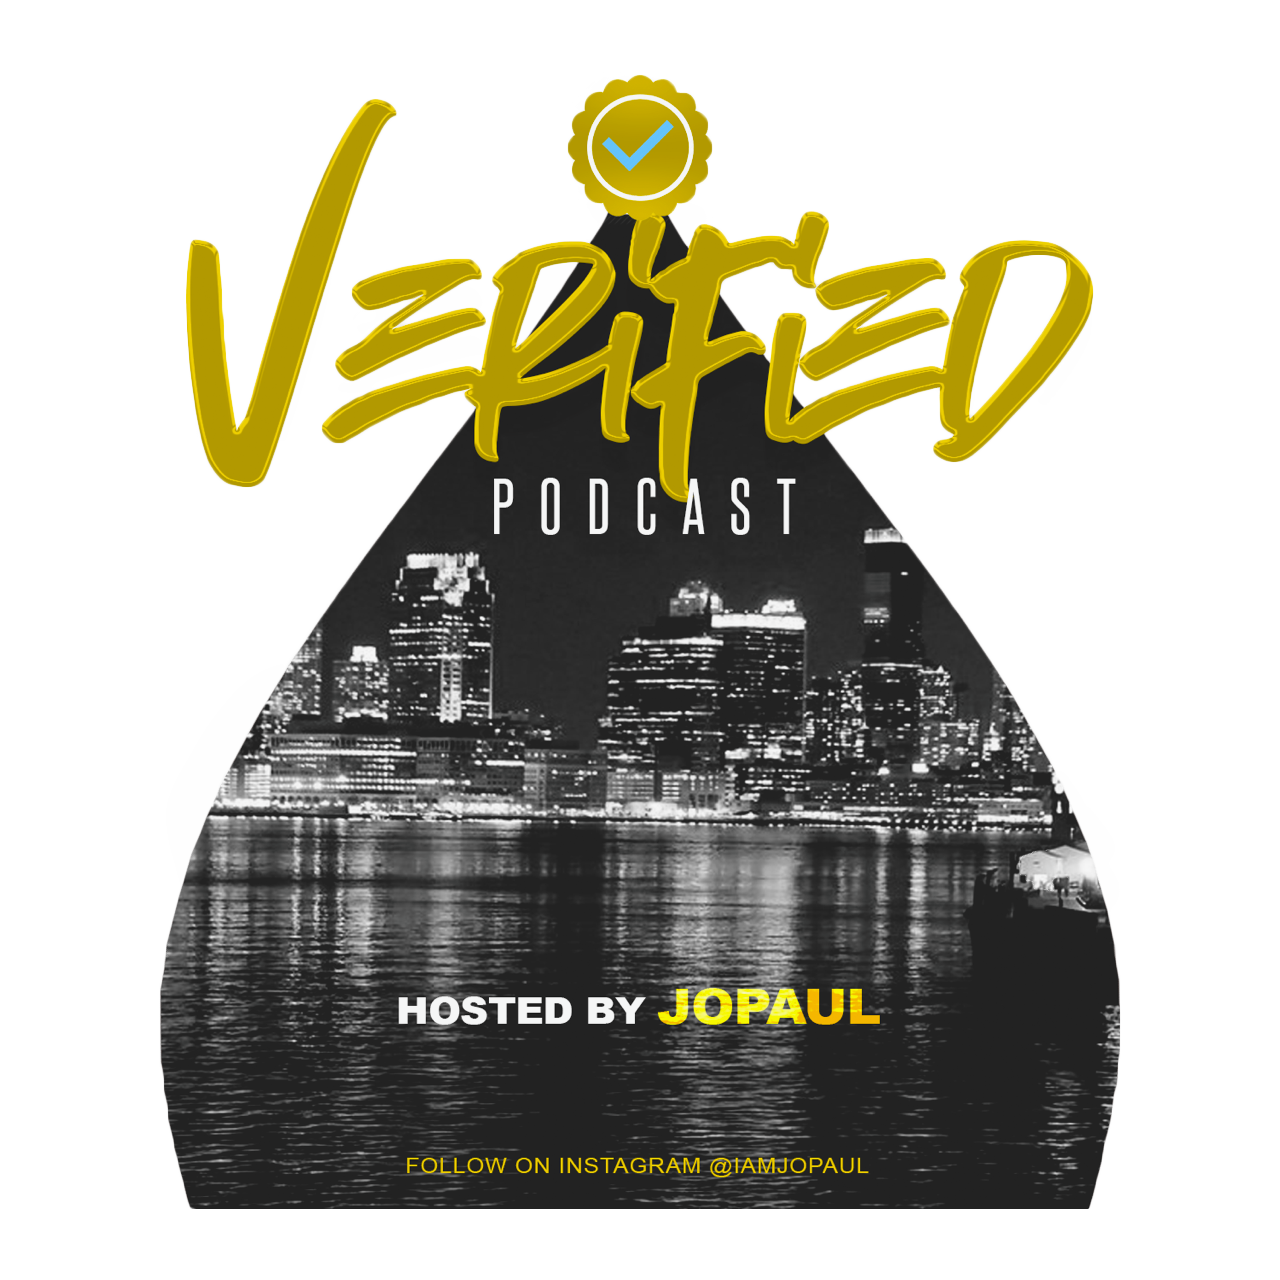 THE VERIFIED PODCAST